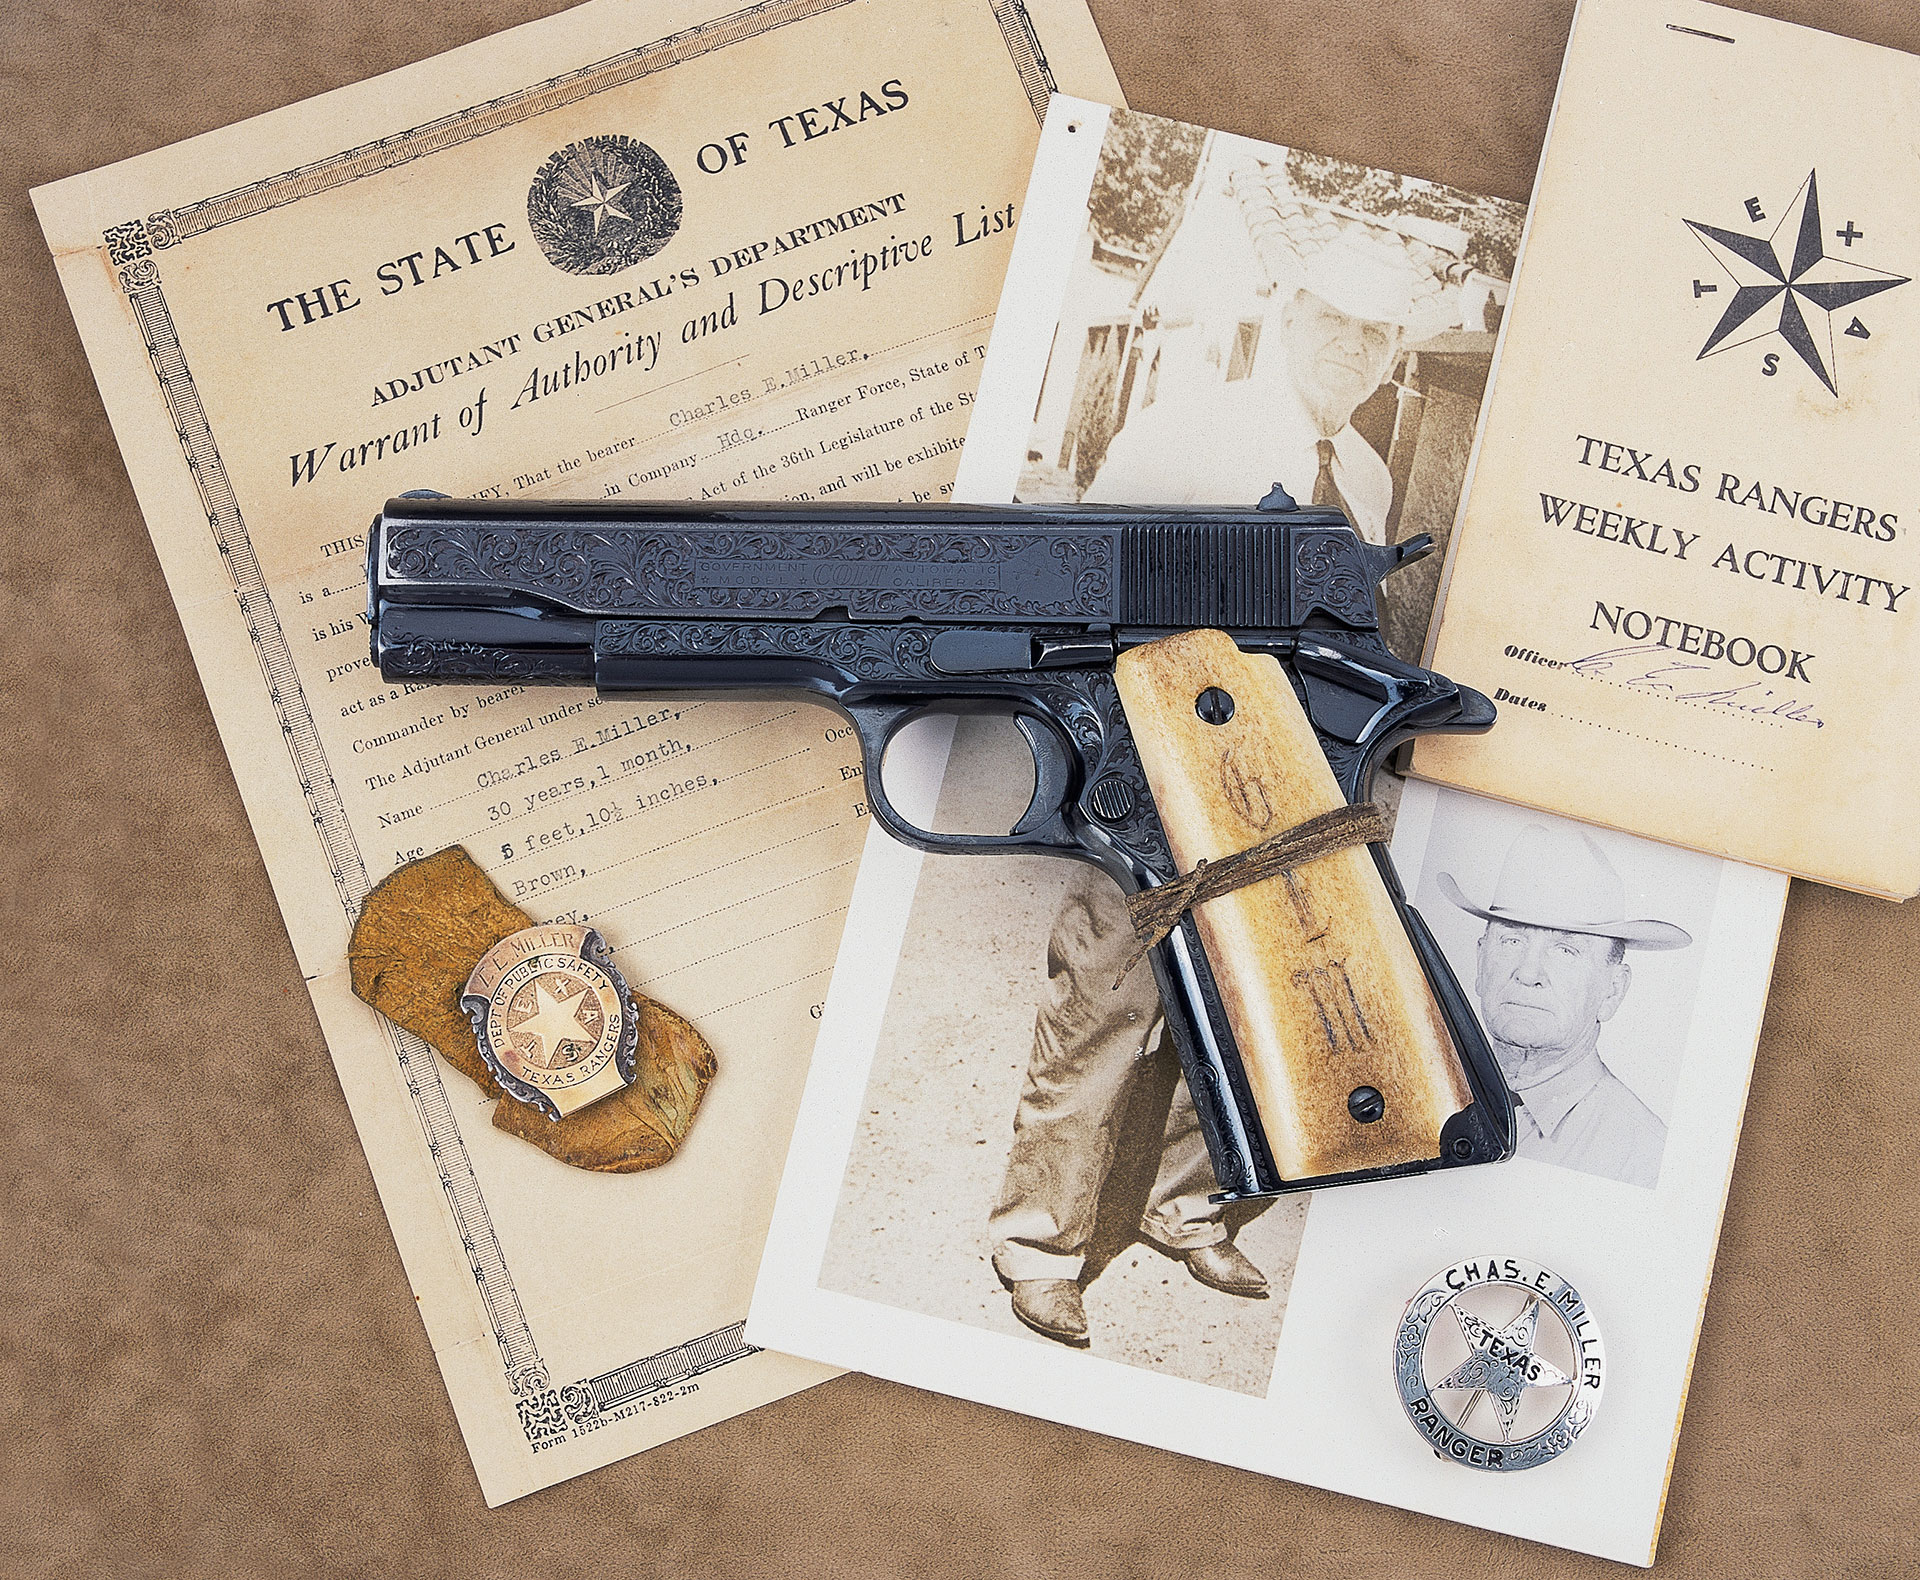 M1911A1 reblued with dark finish and light colored grips on top of documents associated with the pistol.